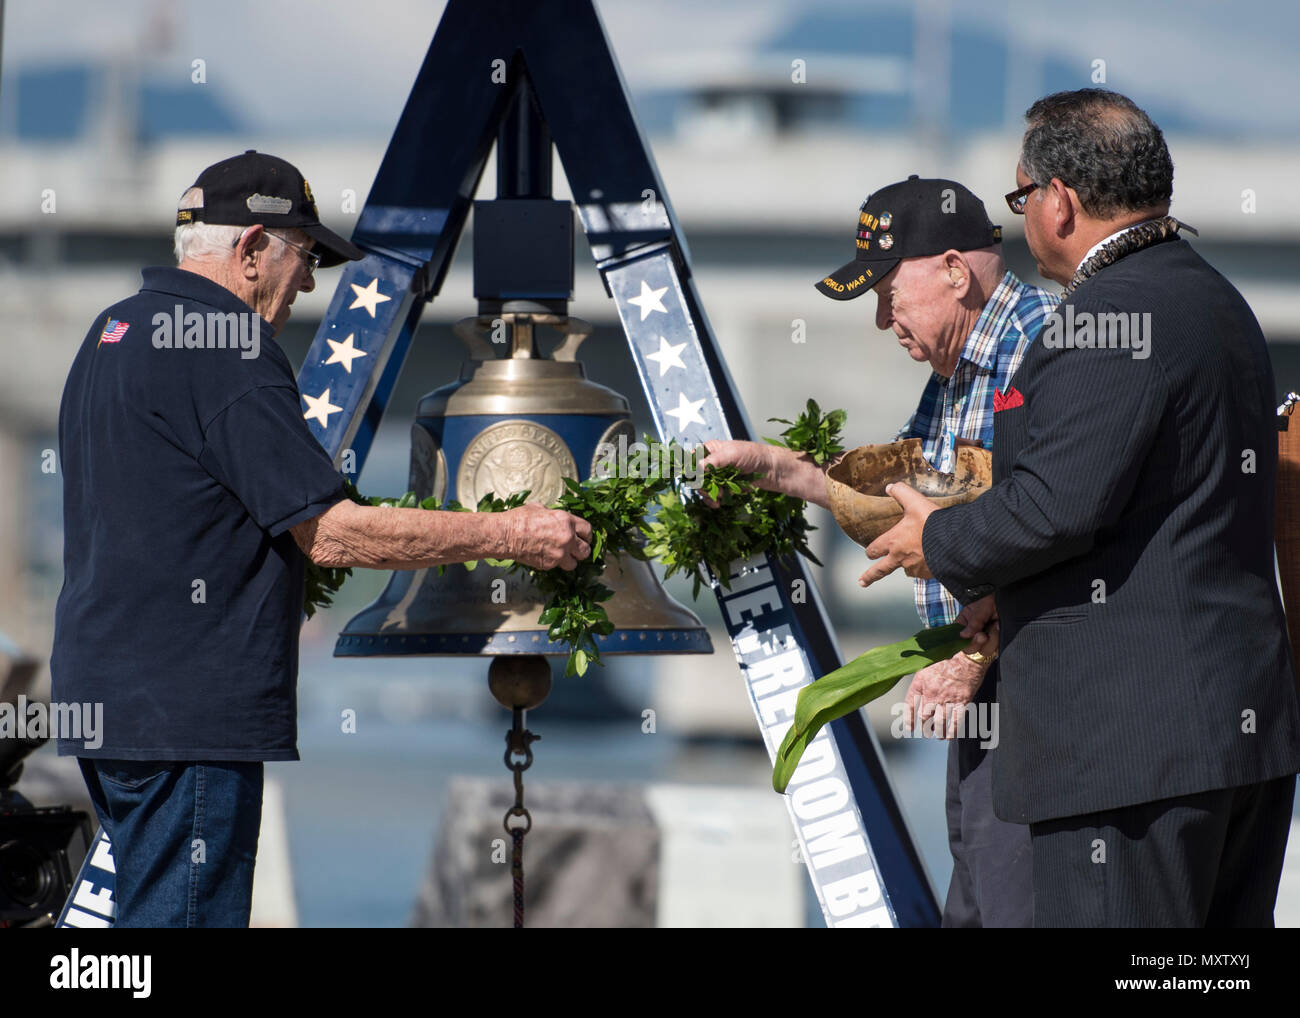 161206-N-LY160-147 PEARL HARBOR (Dec. 6, 2016) Kahu Kelekona Bishaw, right, and World War II veterans perform a blessing during an America's Freedom Bell ringing ceremony at the USS Bowfin Submarine Museum and Park. Dec. 7, 2016, marks the 75th anniversary of the attacks on Pearl Harbor and Oahu. The U.S. military and the State of Hawaii are hosting a series of remembrance events throughout the week to honor the courage and sacrifices of those who served Dec. 7, 1941, and throughout the Pacific theater. As a Pacific nation, the U.S. is committed to continue its responsibility of protecting the Stock Photo